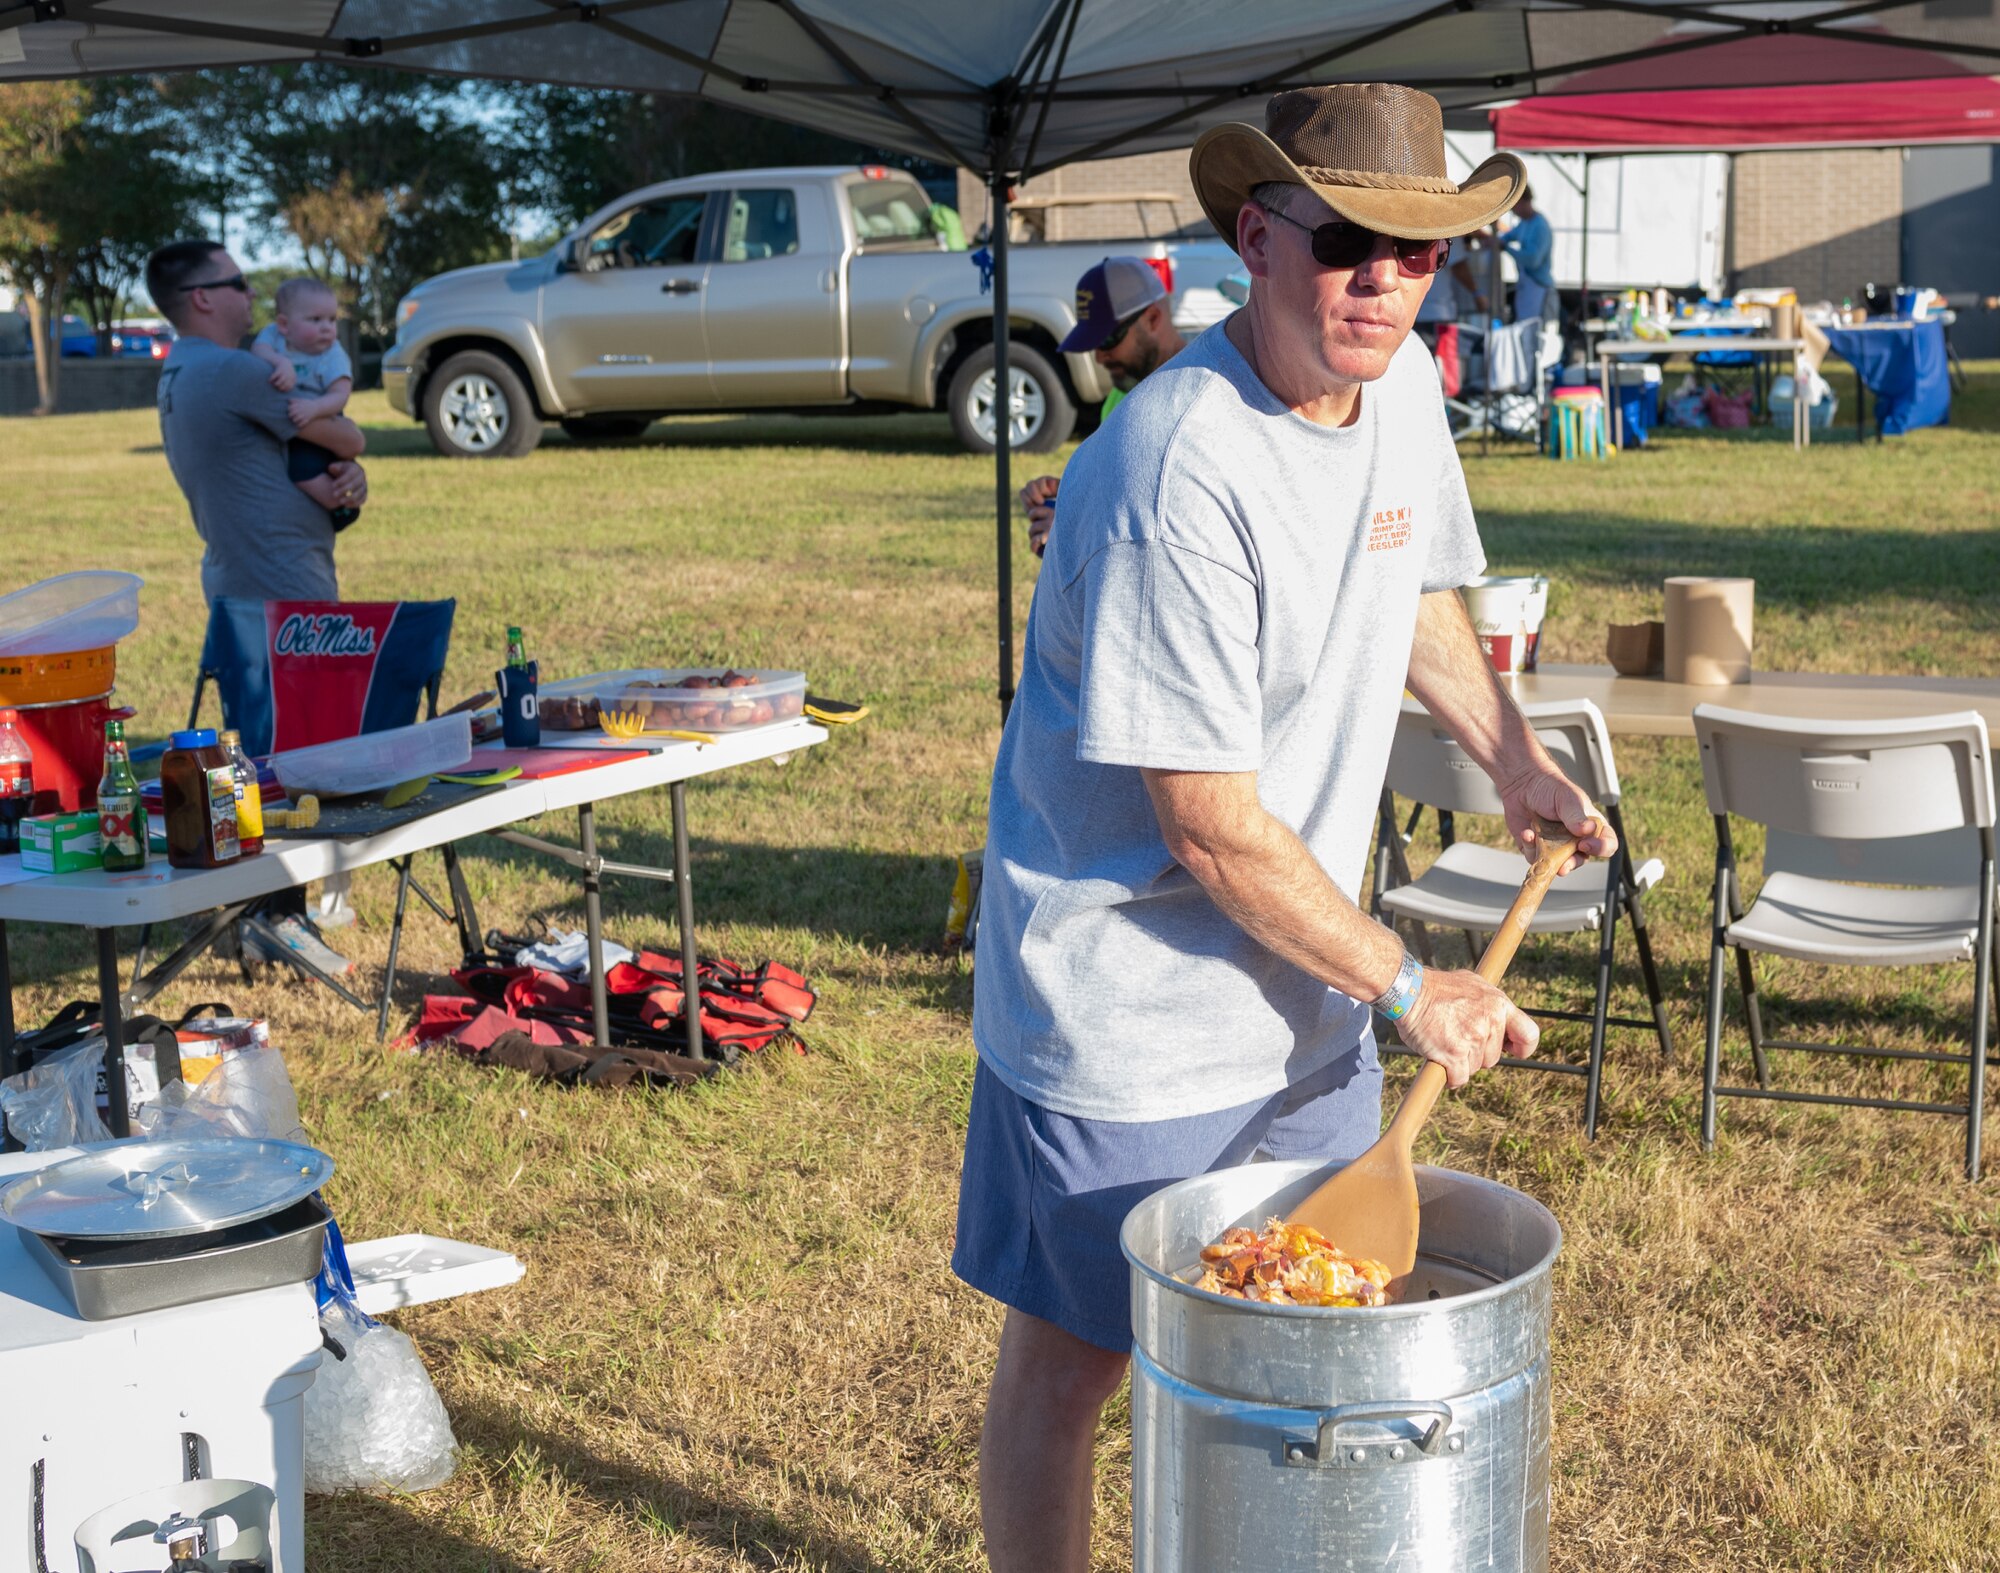 U.S. Air Force Col. C. Mike Smith, Second Air Force A3/6 commander and "Shucking to None" team member, stirs a pot of boiled shrimp during the Tails ’N Ales Annual Shrimp Cook-off outside the Bay Breeze Event Center at Keesler Air Force Base, Mississippi, Oct. 14, 2022. The 81st Force Support Squadron hosted event offered a variety of craft beers for tasting and many teams fighting for the ultimate best shrimp recipe. (U.S. Air Force photo by Andre' Askew)